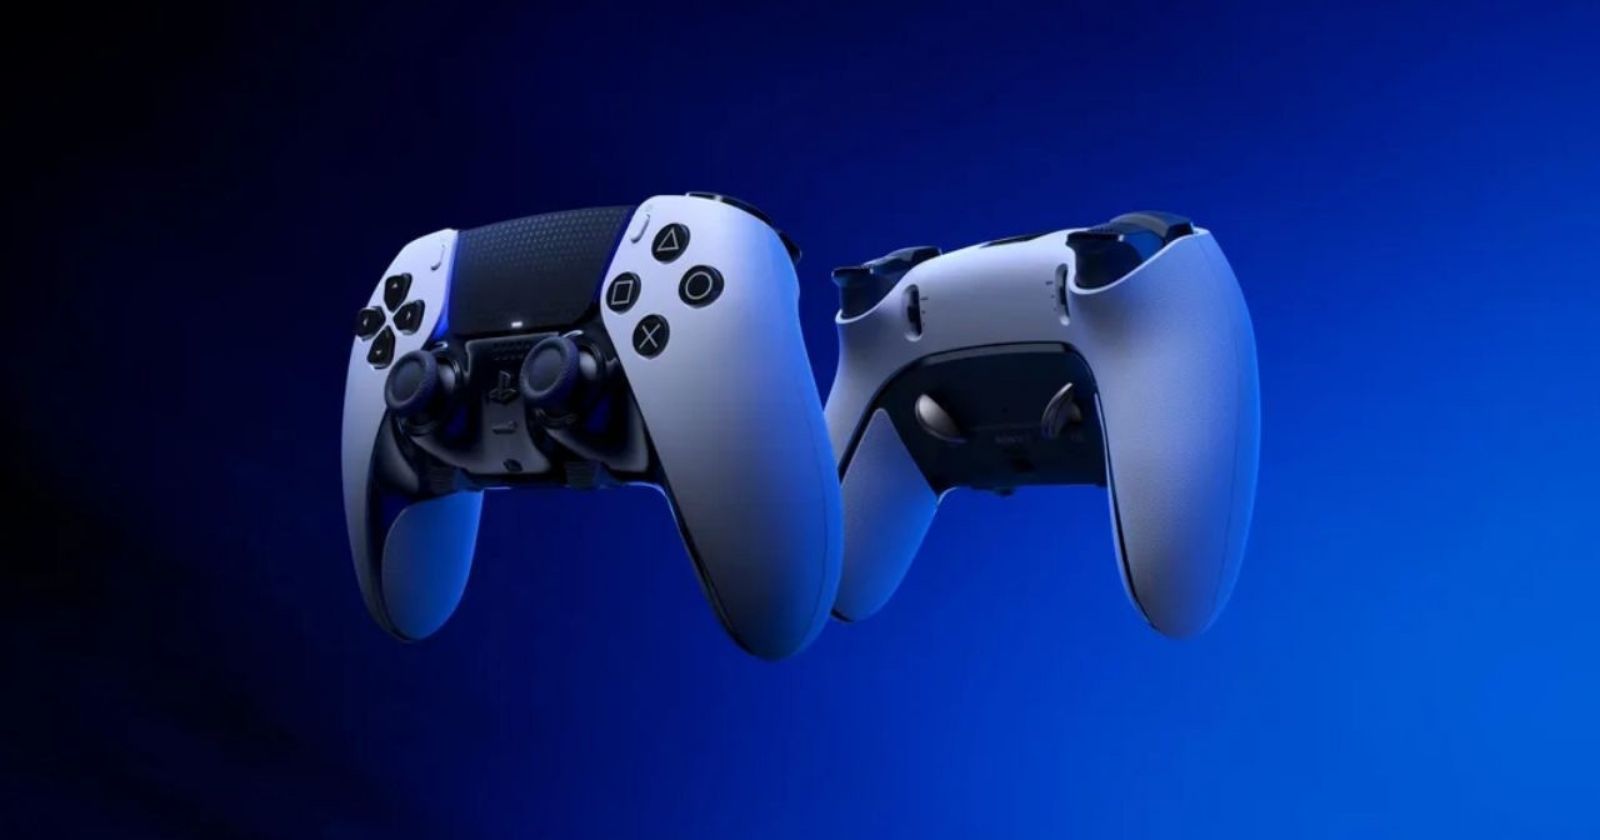 After PlayStation 5 Slim, a new controller has emerged!